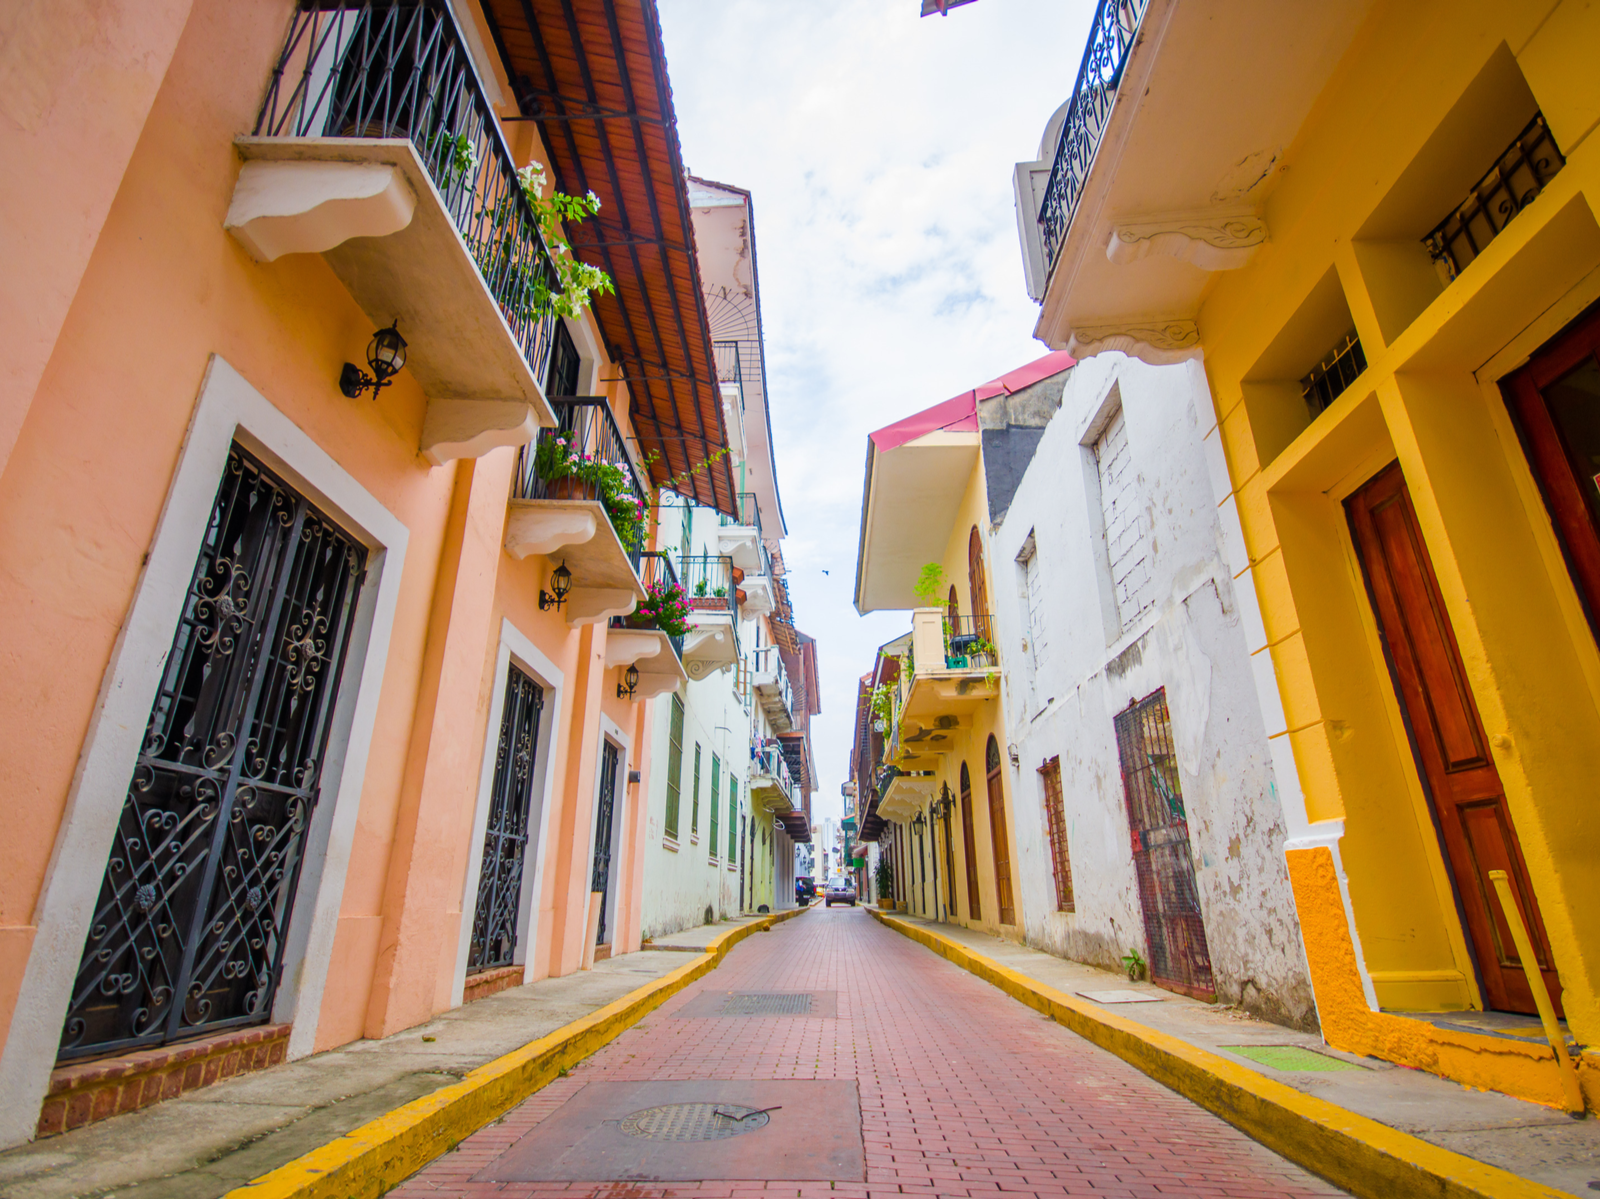 Historic old town Panama City with empty streets that'd make someone wonder, "Is Panama Safe?"